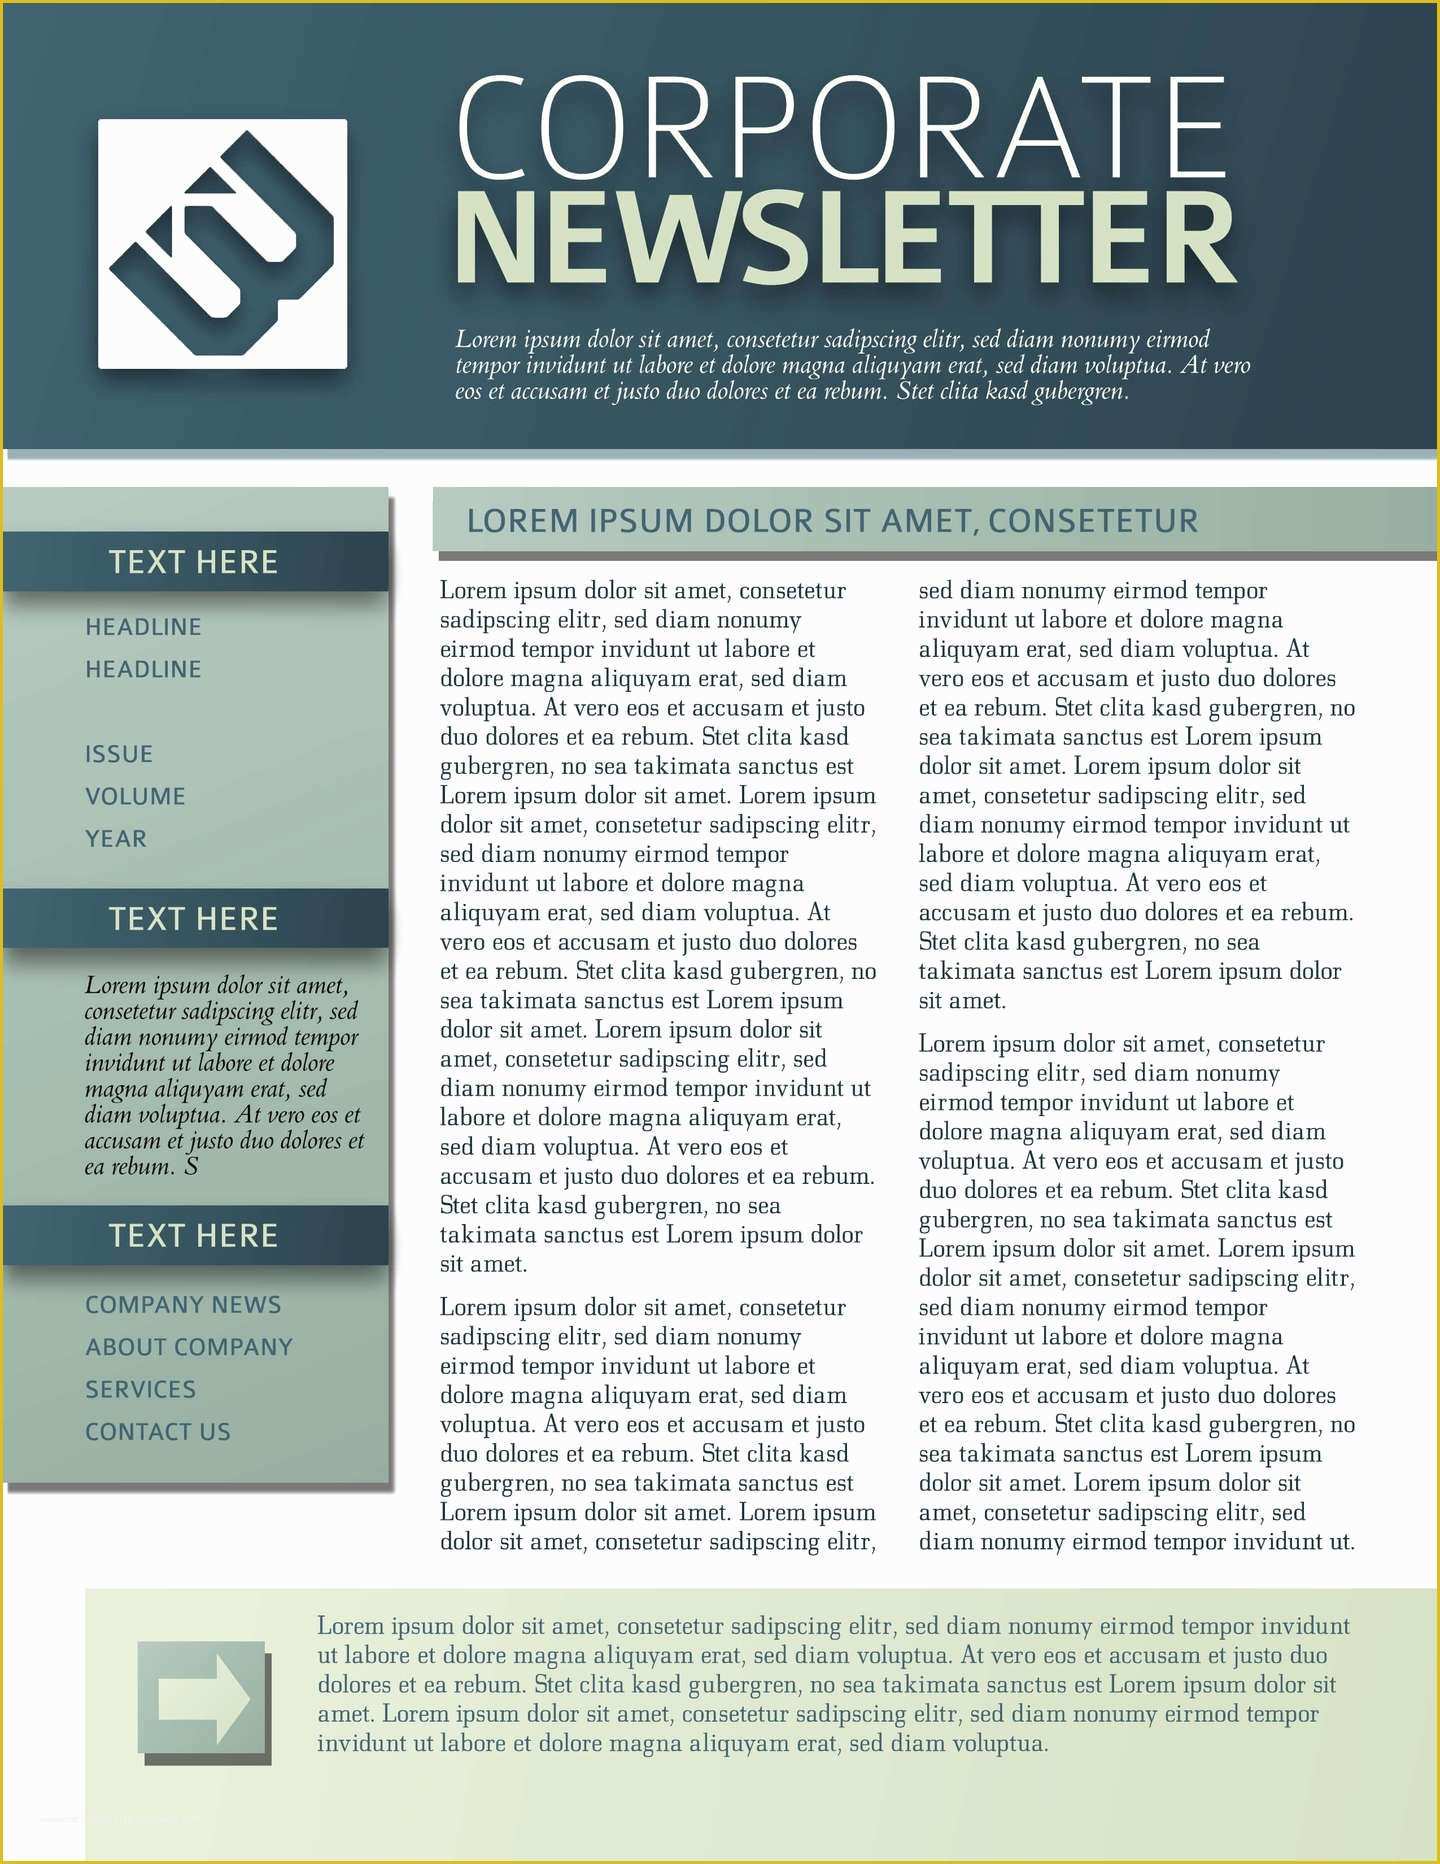 Free Newsletter Templates Of 11 Best Sample Newsletters Images On